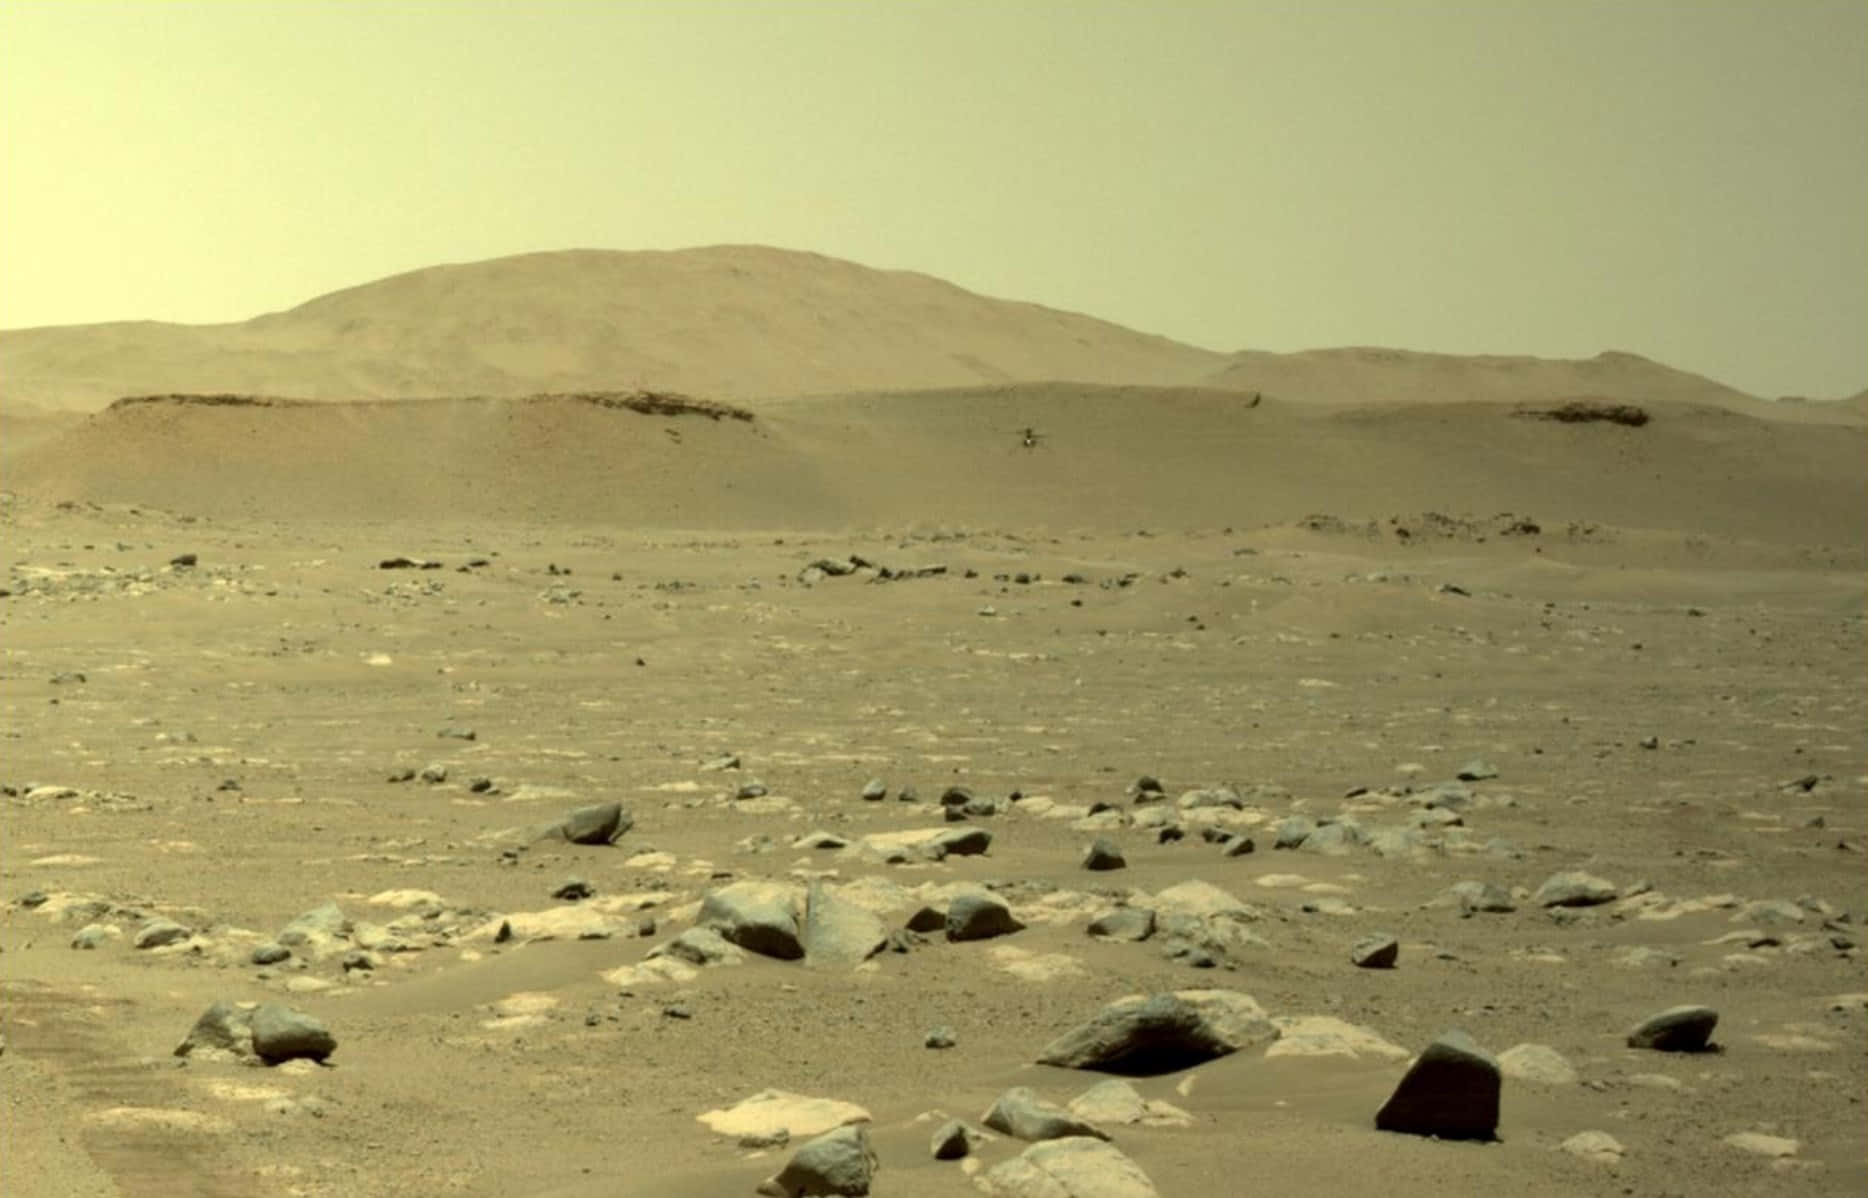 A View Of The Rocky Landscape On Mars